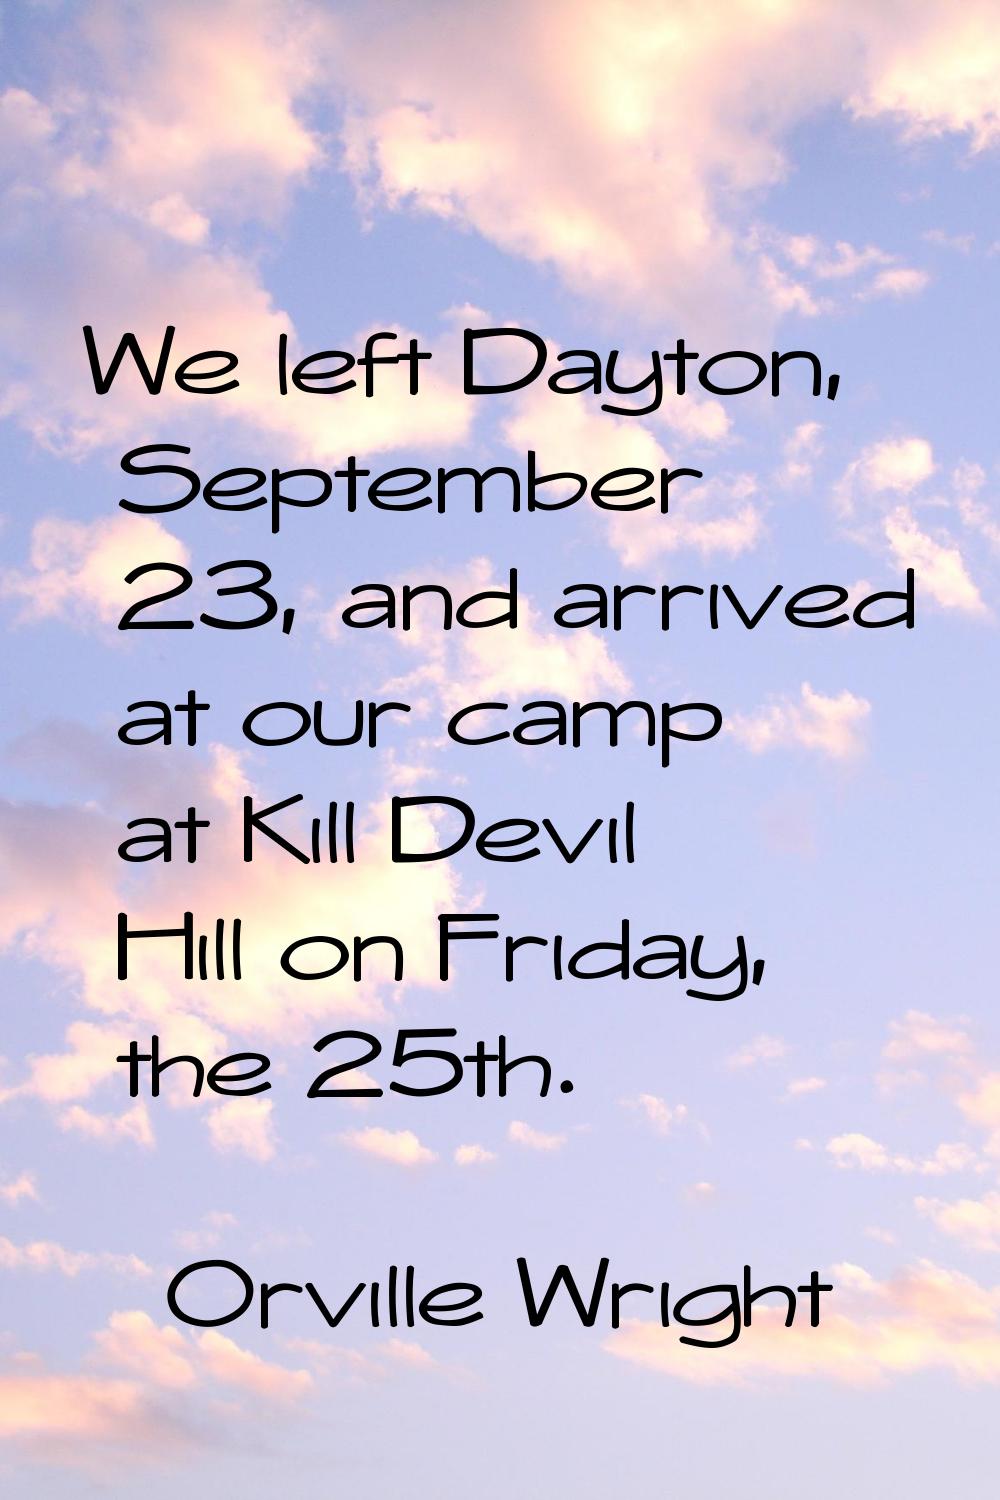 We left Dayton, September 23, and arrived at our camp at Kill Devil Hill on Friday, the 25th.